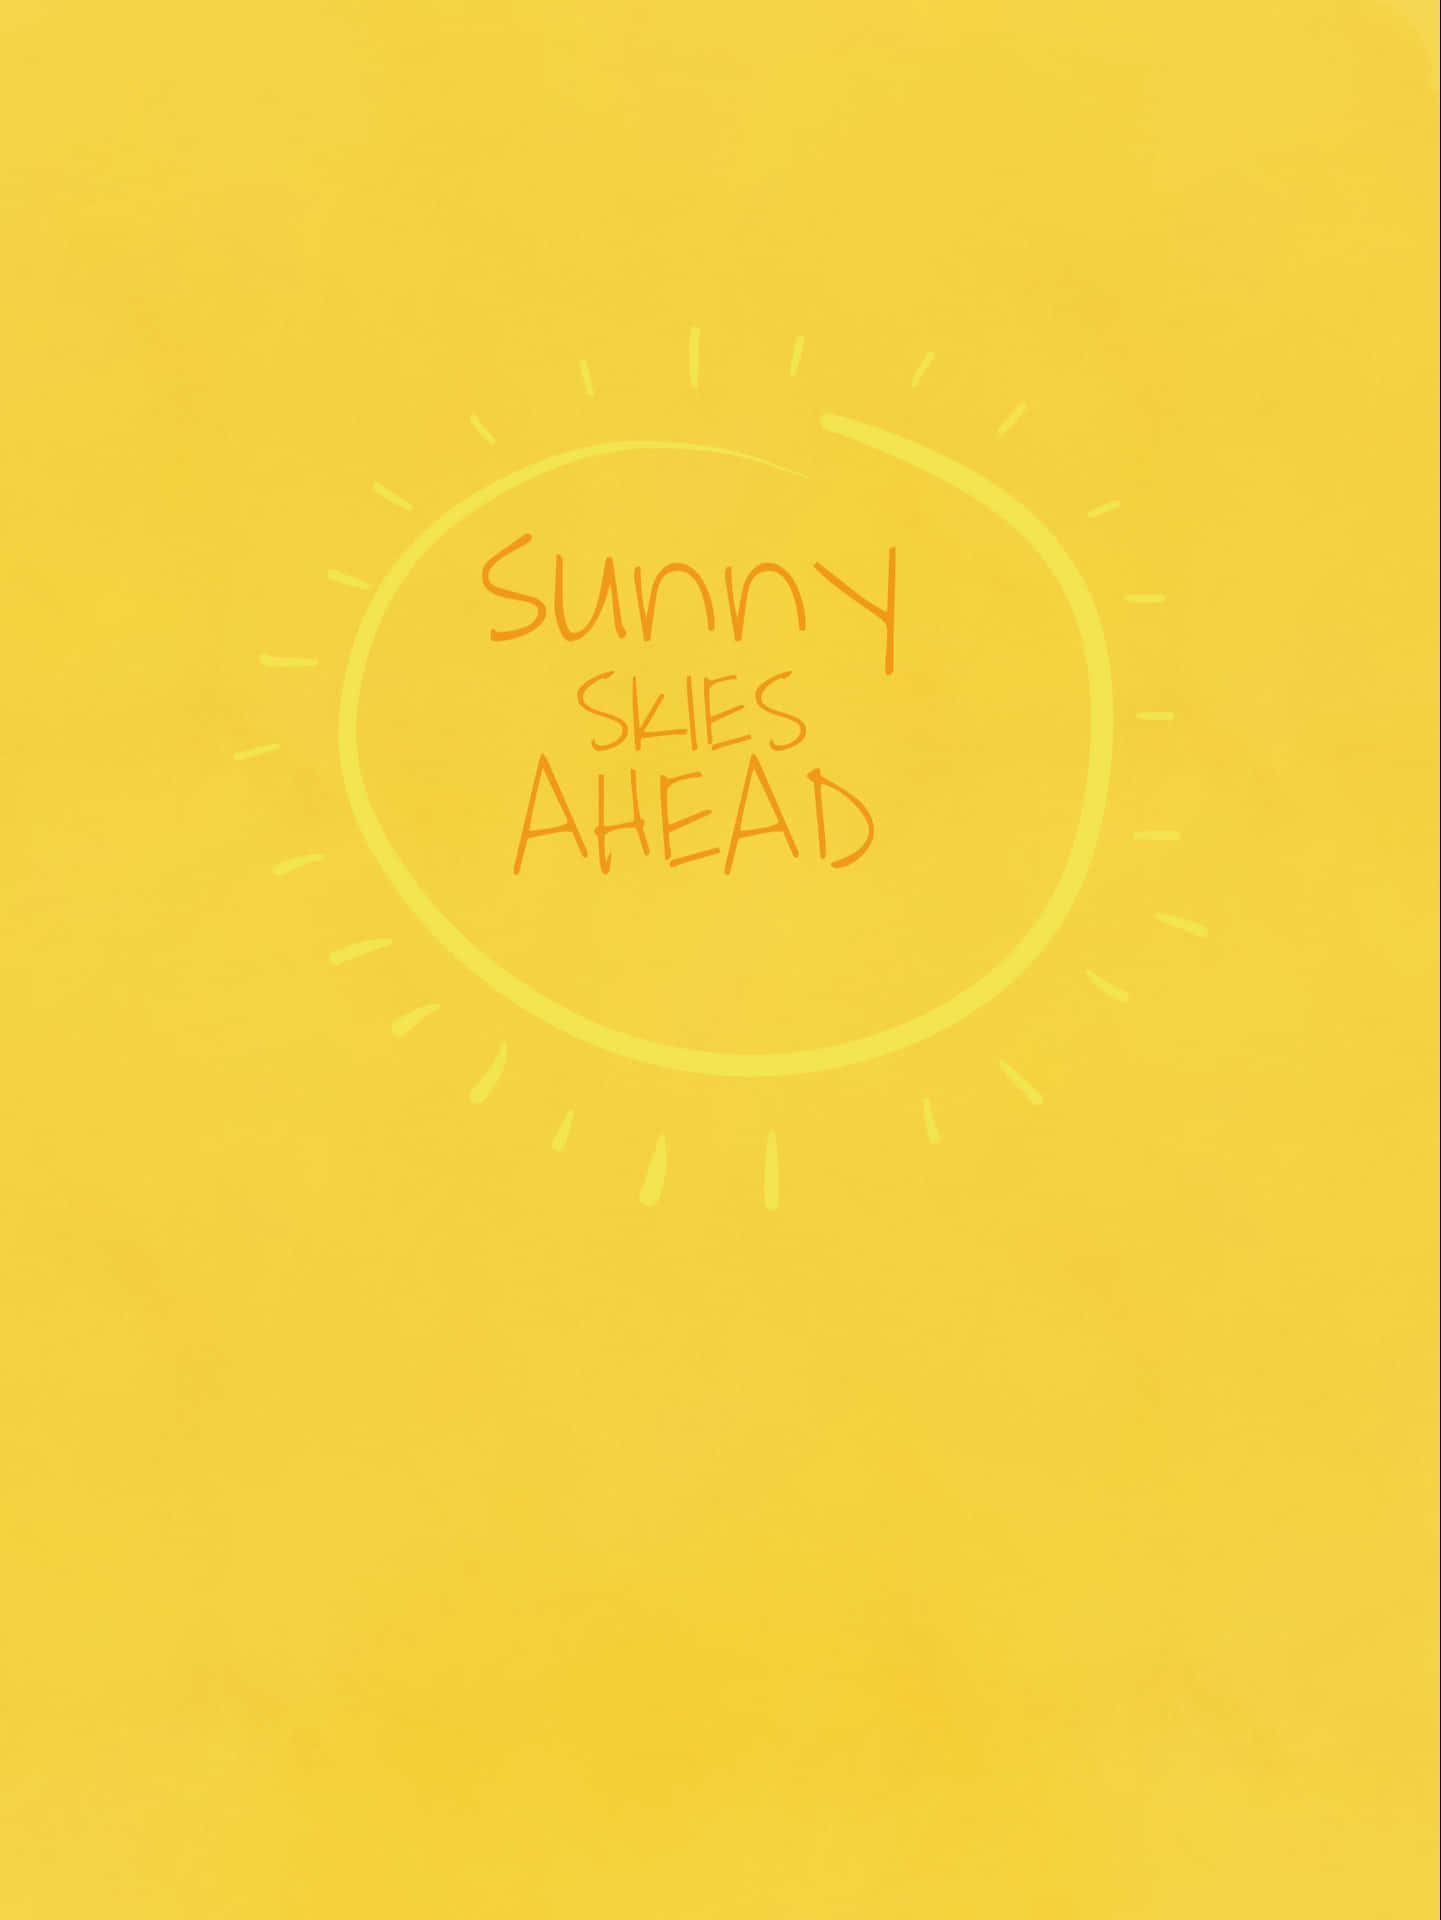 Sunny Sales Ahead - A Yellow Background With A Yellow Sun Wallpaper